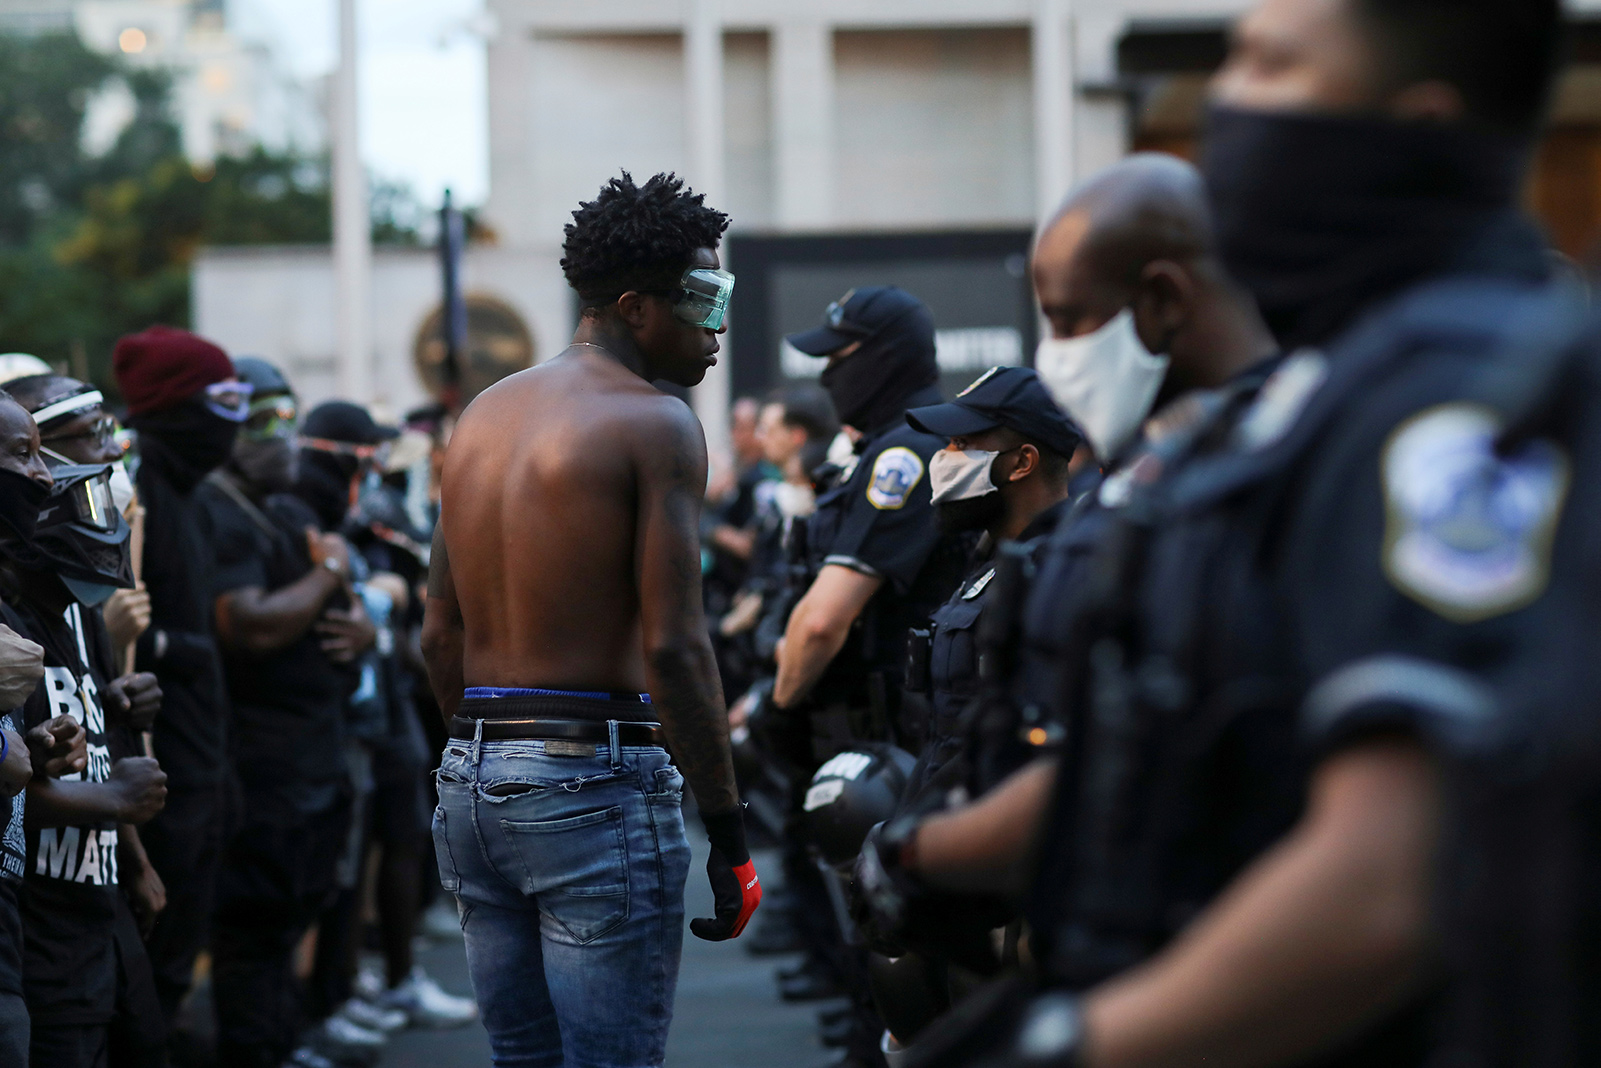 A demonstrator faces police officers near Black Lives Matter Plaza as racial inequality protests continue, in Washington, U.S.